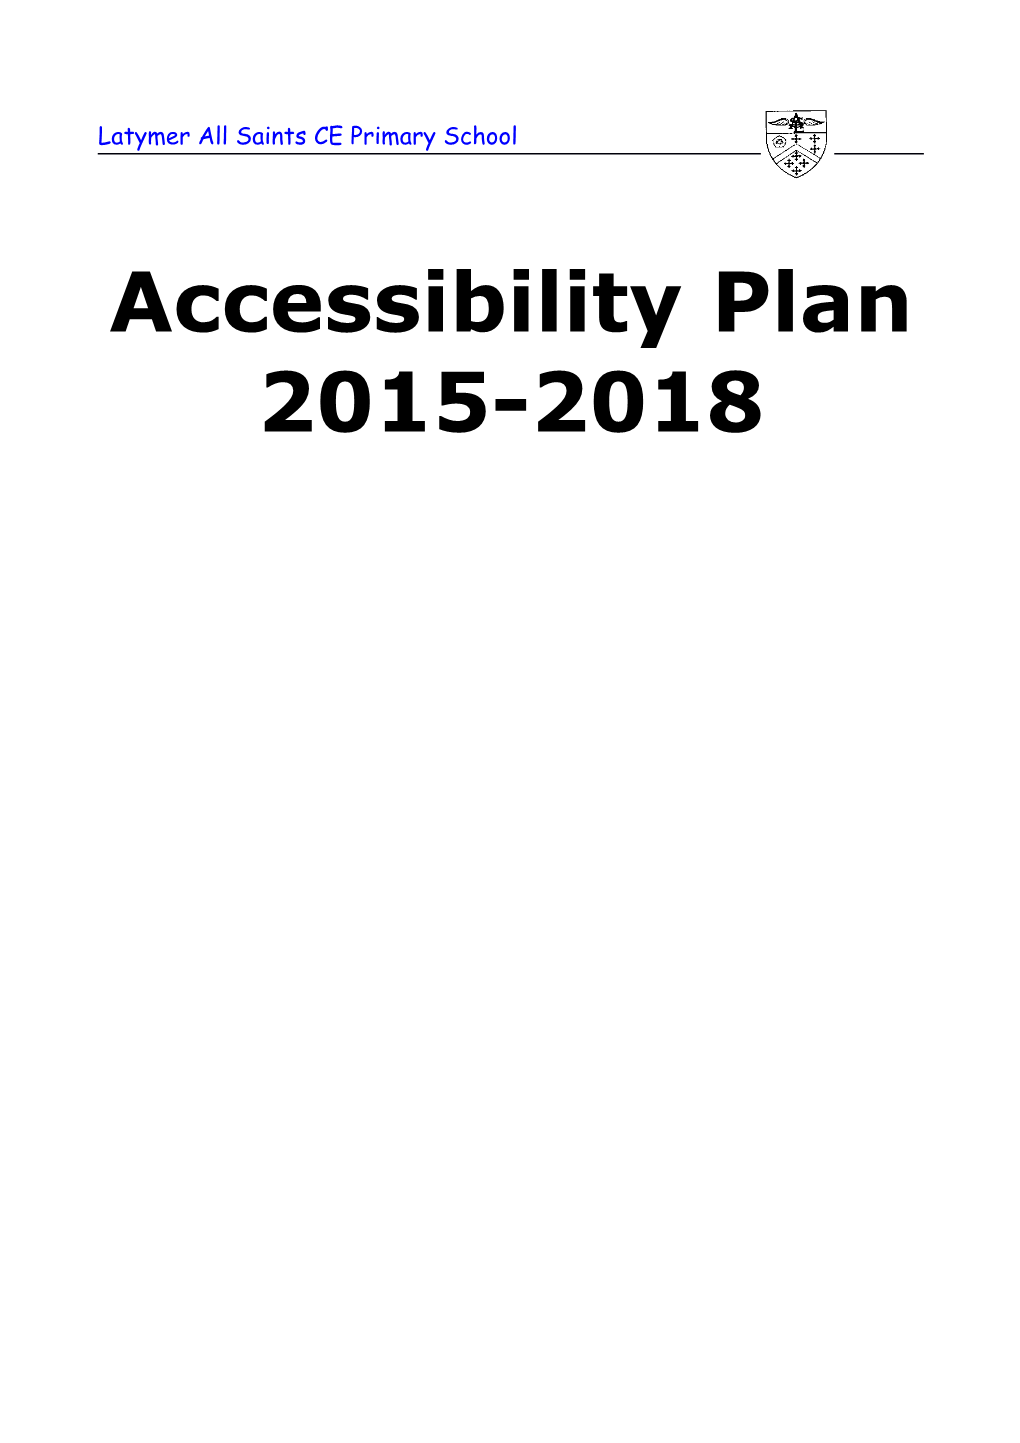 Accessibility Plan Guidance and Template February 2014